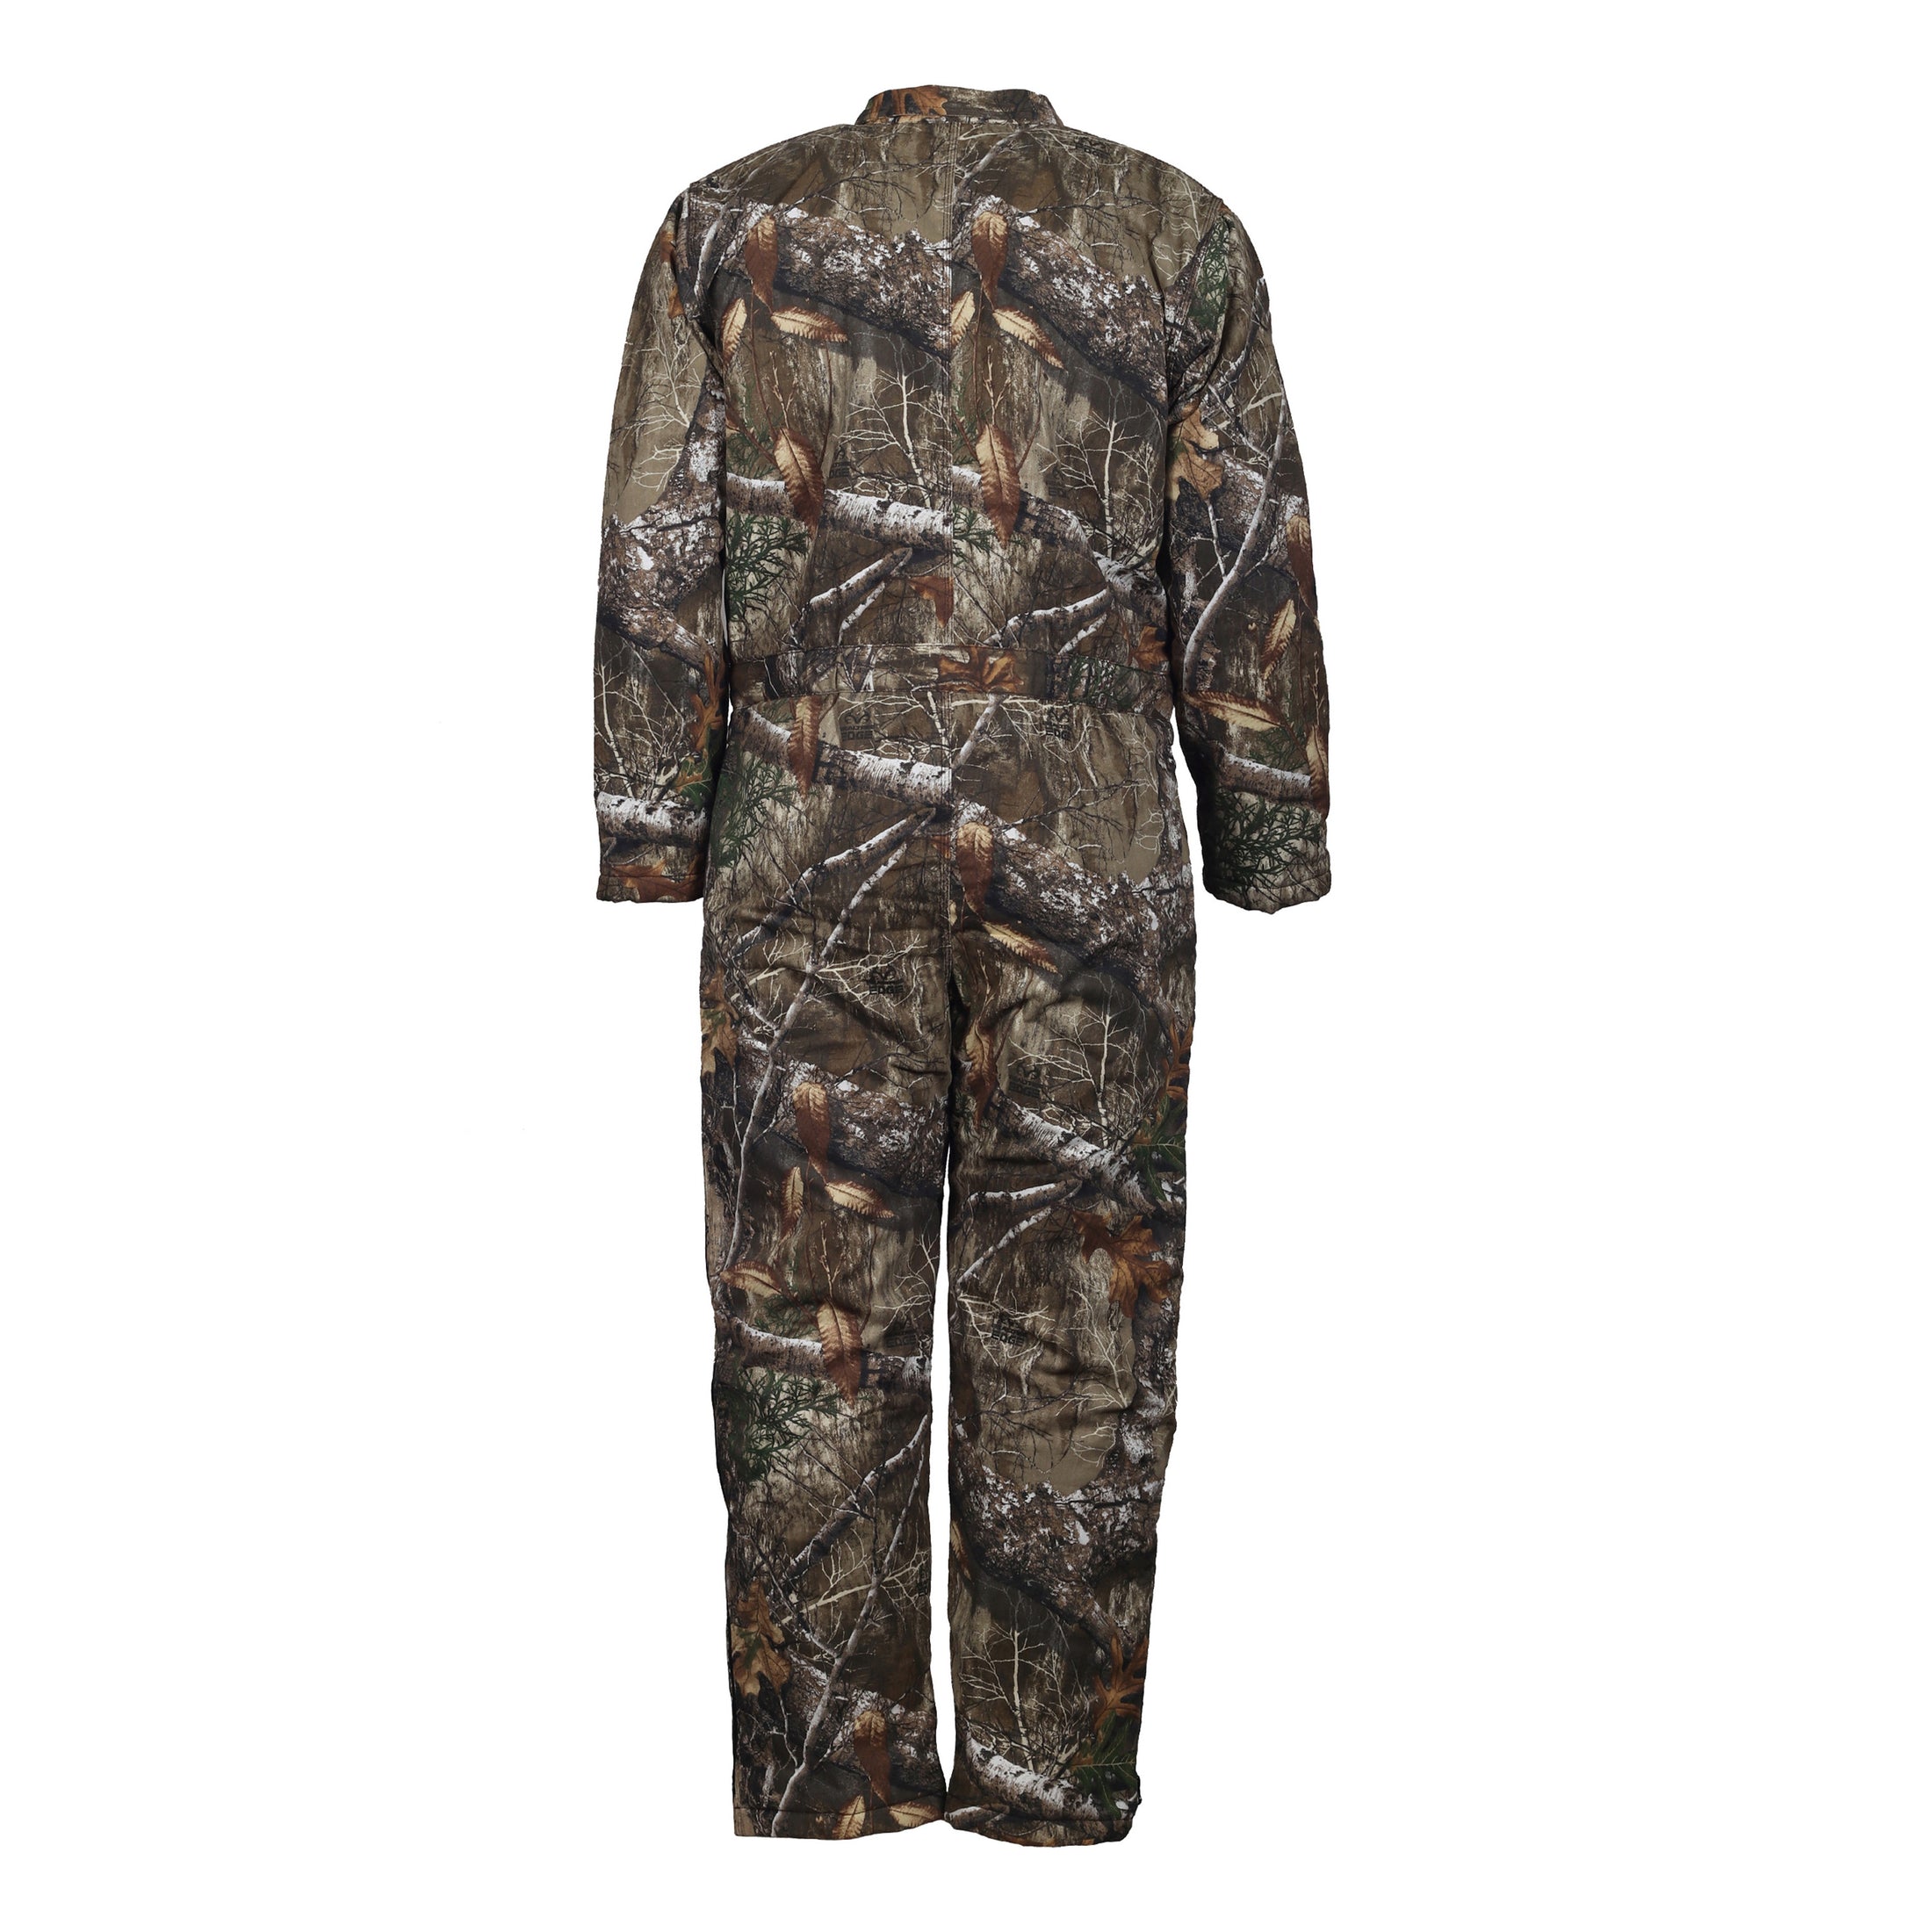 gamehide youth tundra coveralls back view (realtree edge)